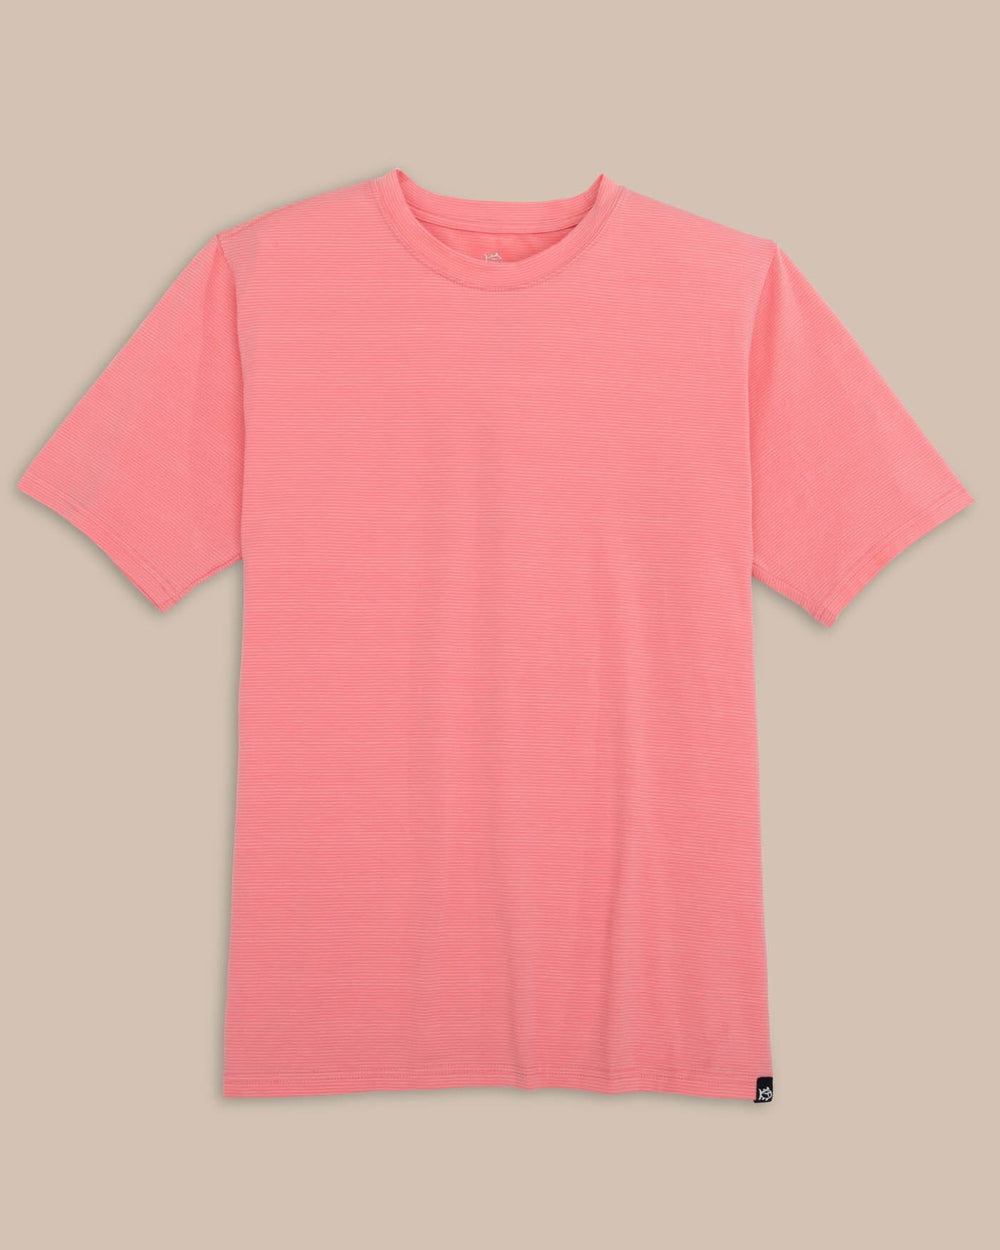 The front view of the Southern Tide The Seaport Davenport Stripe Tee by Southern Tide - Geranium Pink